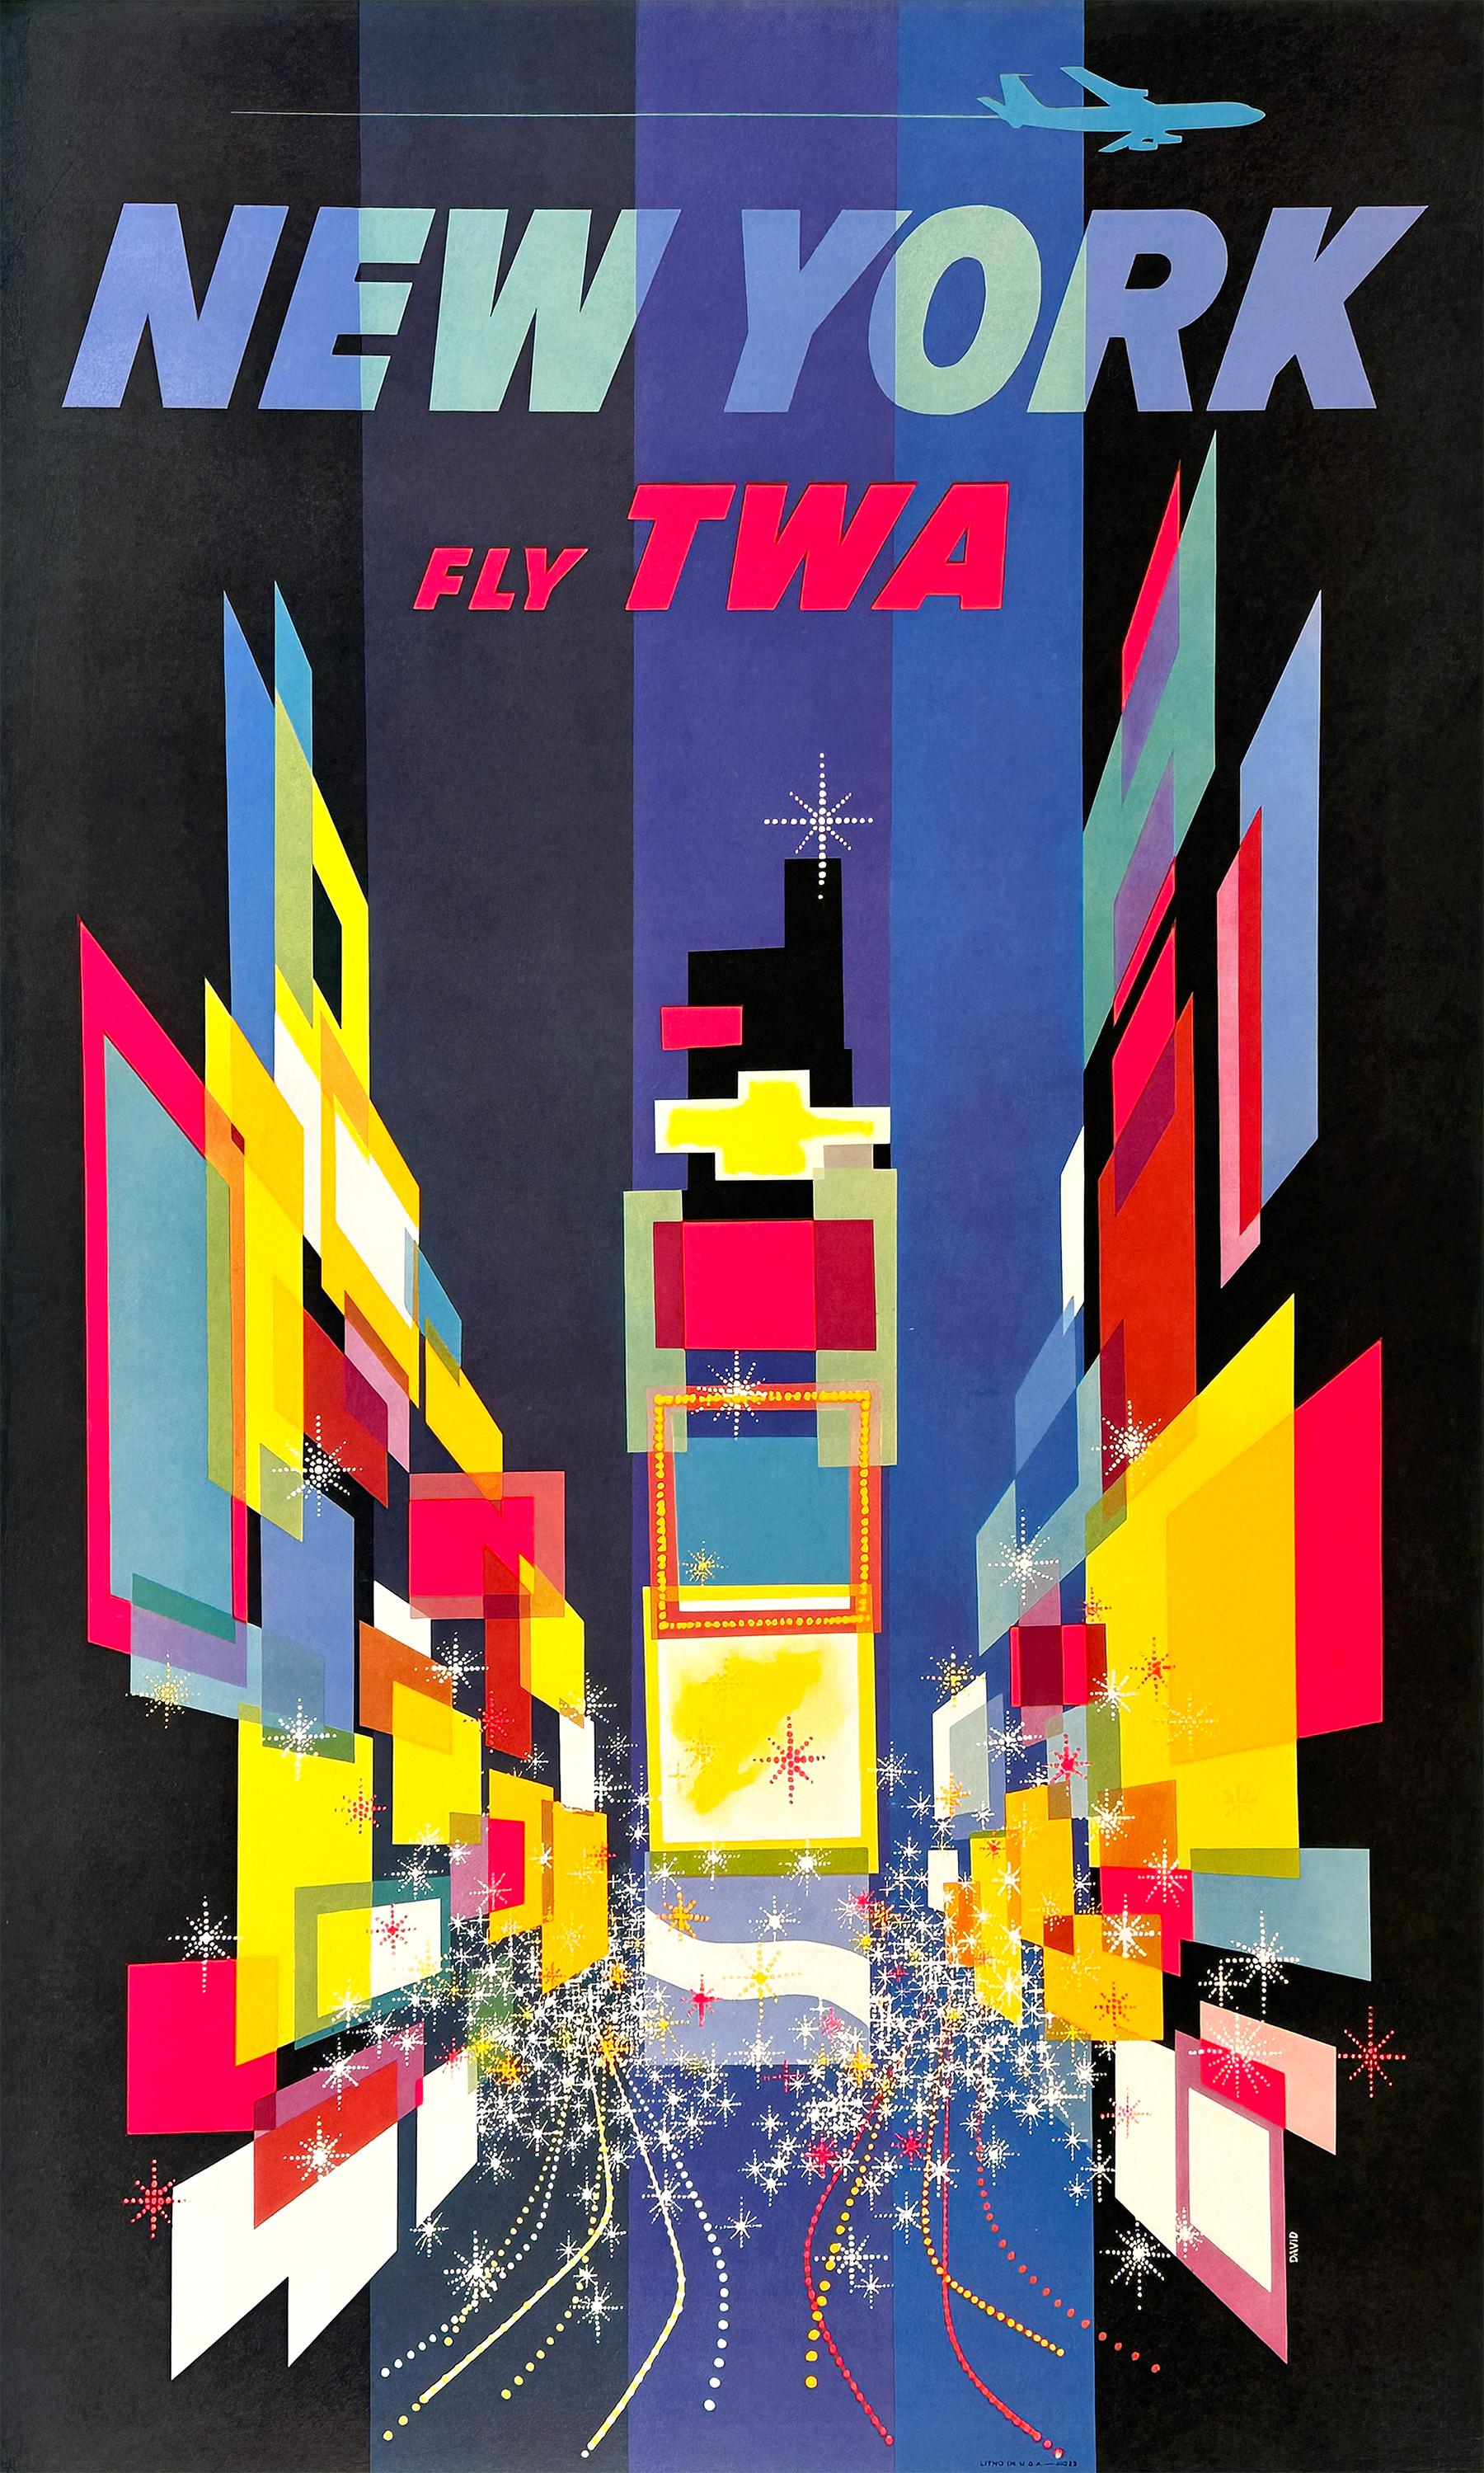 In the Post World War ll era, Howard Hughes as the owner of TWA was a dominant force in expanding and promoting the routes flown by his company. As the economy was vastly improving, airline travel for business and pleasure was on the upswing and